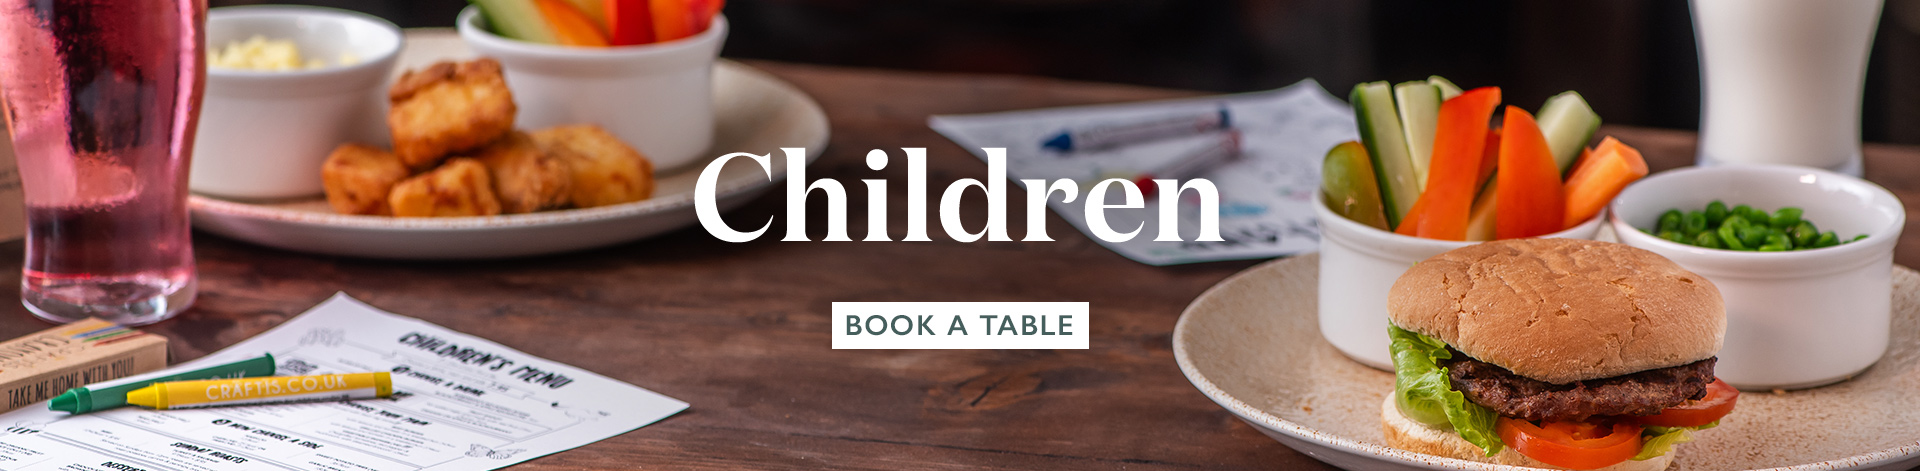 Children's Menu at The Cat and Fiddle